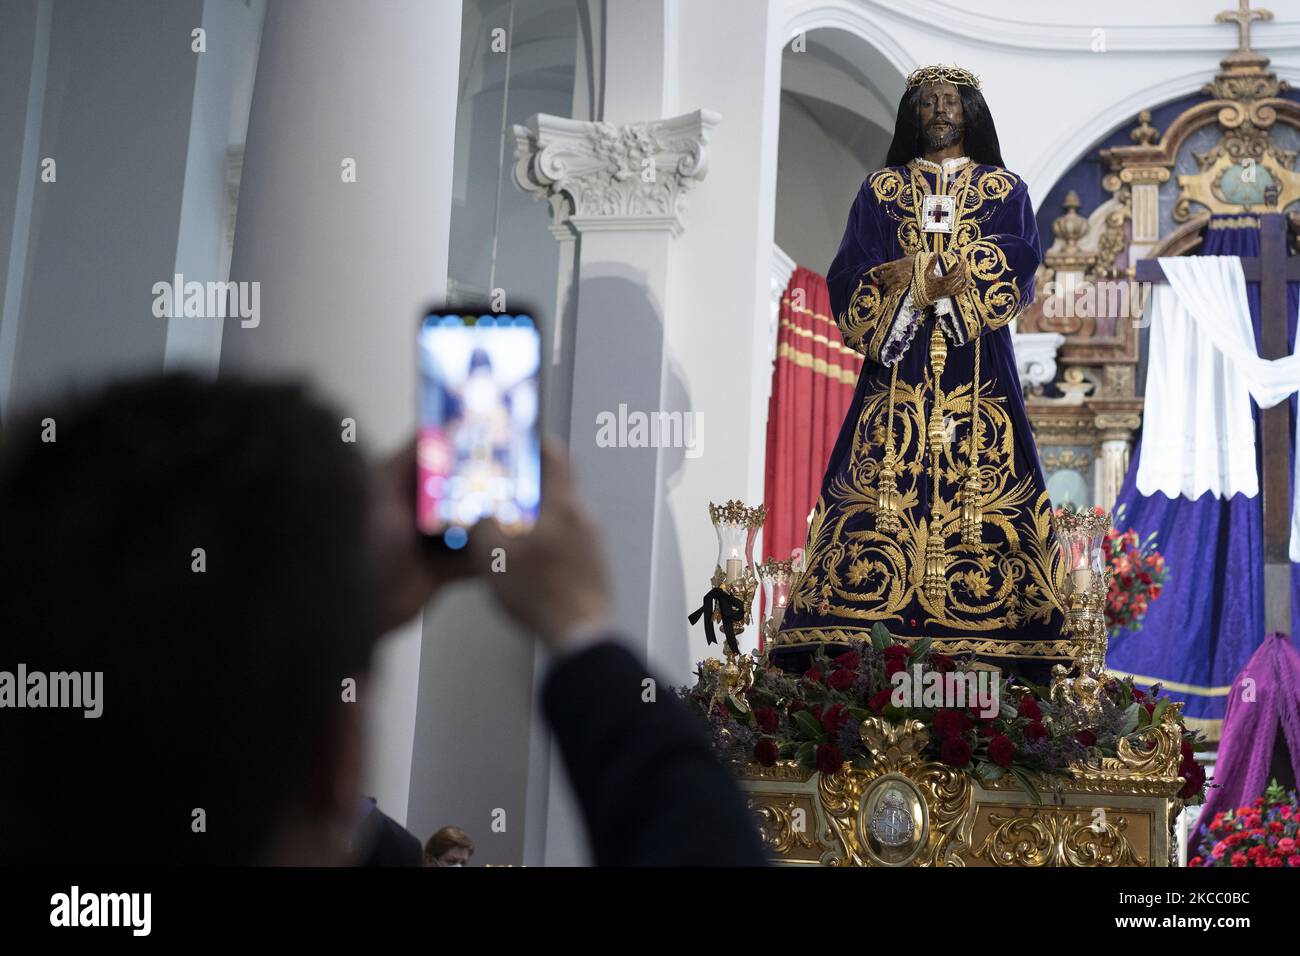 The processional altar of the image of the Cristo de Medinaceli is found in the Baslica de Jess de Medinaceli in Madrid (Spain), on March 30, 2021. Unlike last year, there were no processions or masses at Easter , this year there will be no processions to avoid crowds and coronavirus infections, but there will be liturgical acts in churches and parishes. In addition, the brotherhoods and brotherhoods will exhibit the images of their holders in the temples where they are based. (Photo by Oscar Gonzalez/NurPhoto) Stock Photo